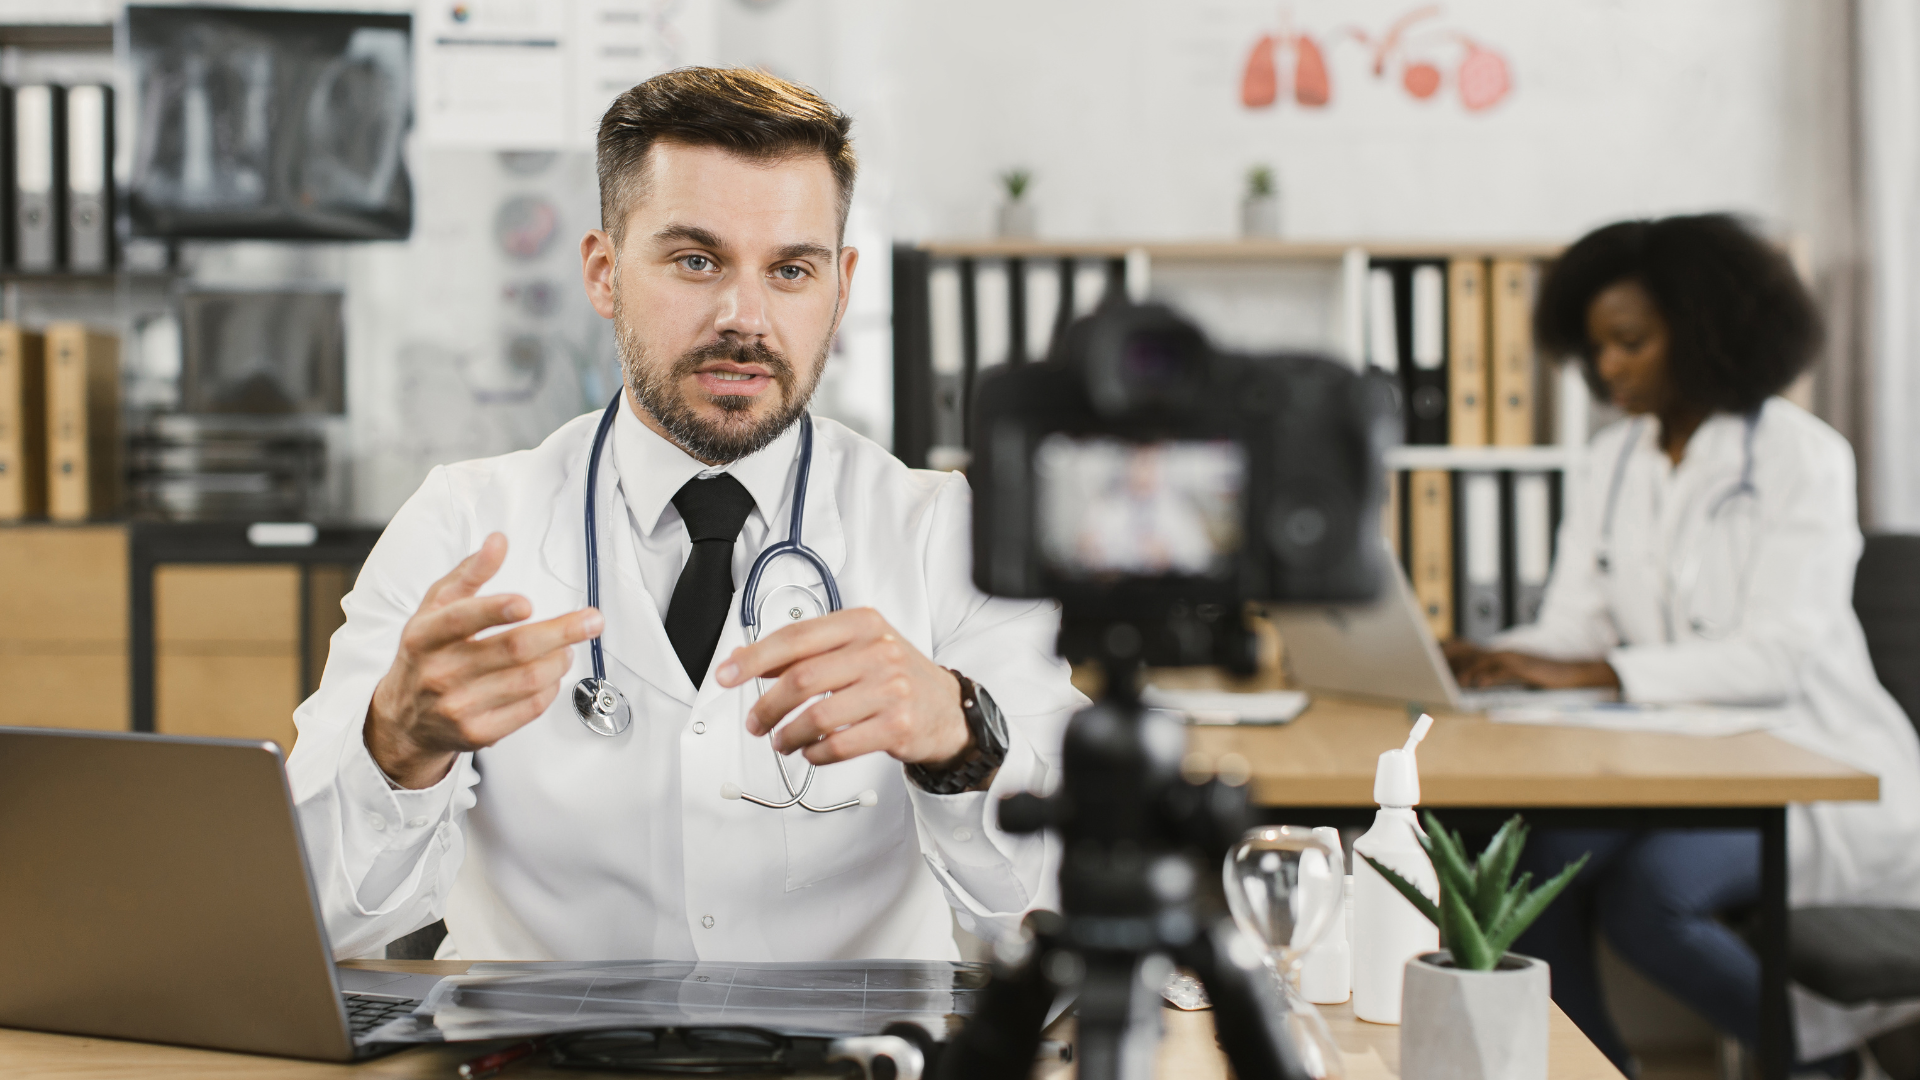 Video Marketing Trends in Healthcare: What you need to know